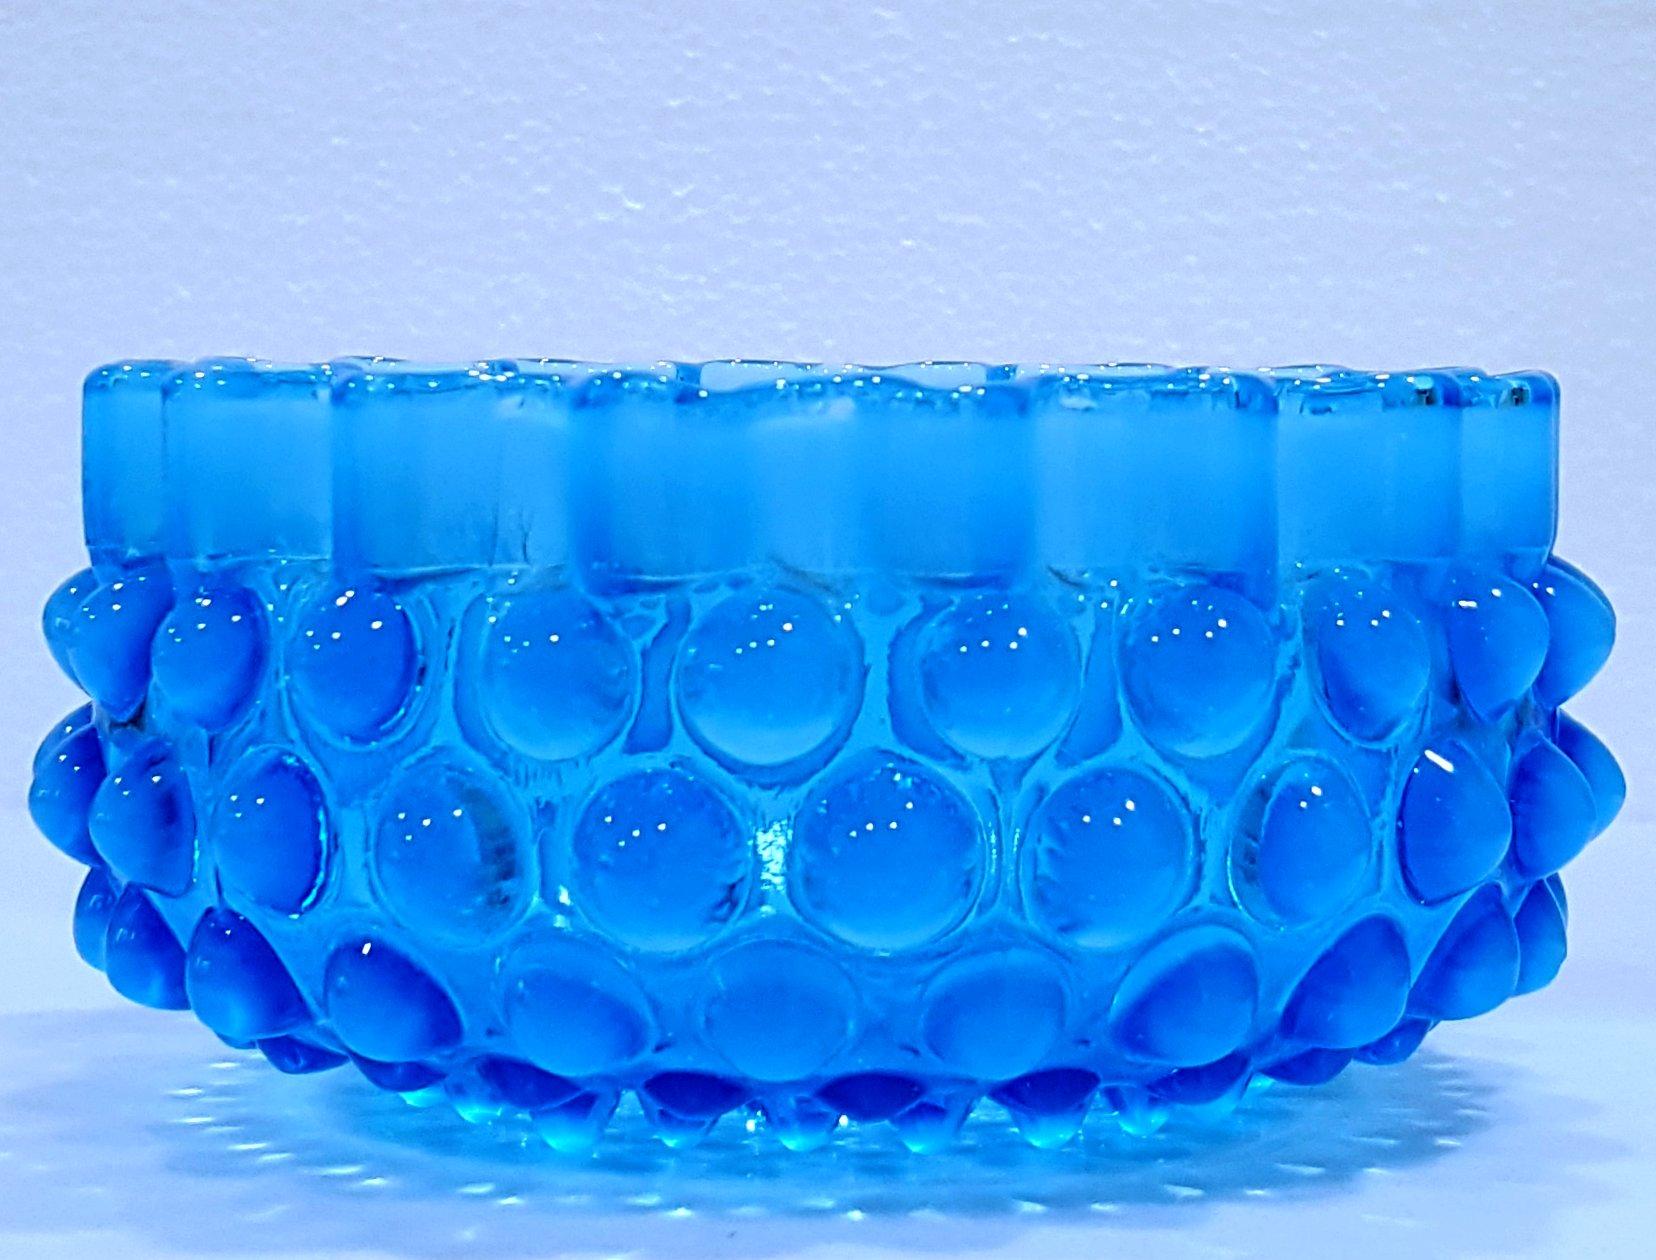 Antique Hobbs Brockunier Dewdrop, aka Hobnail, Glass Bowl - blue In Good Condition For Sale In Warrenton, OR